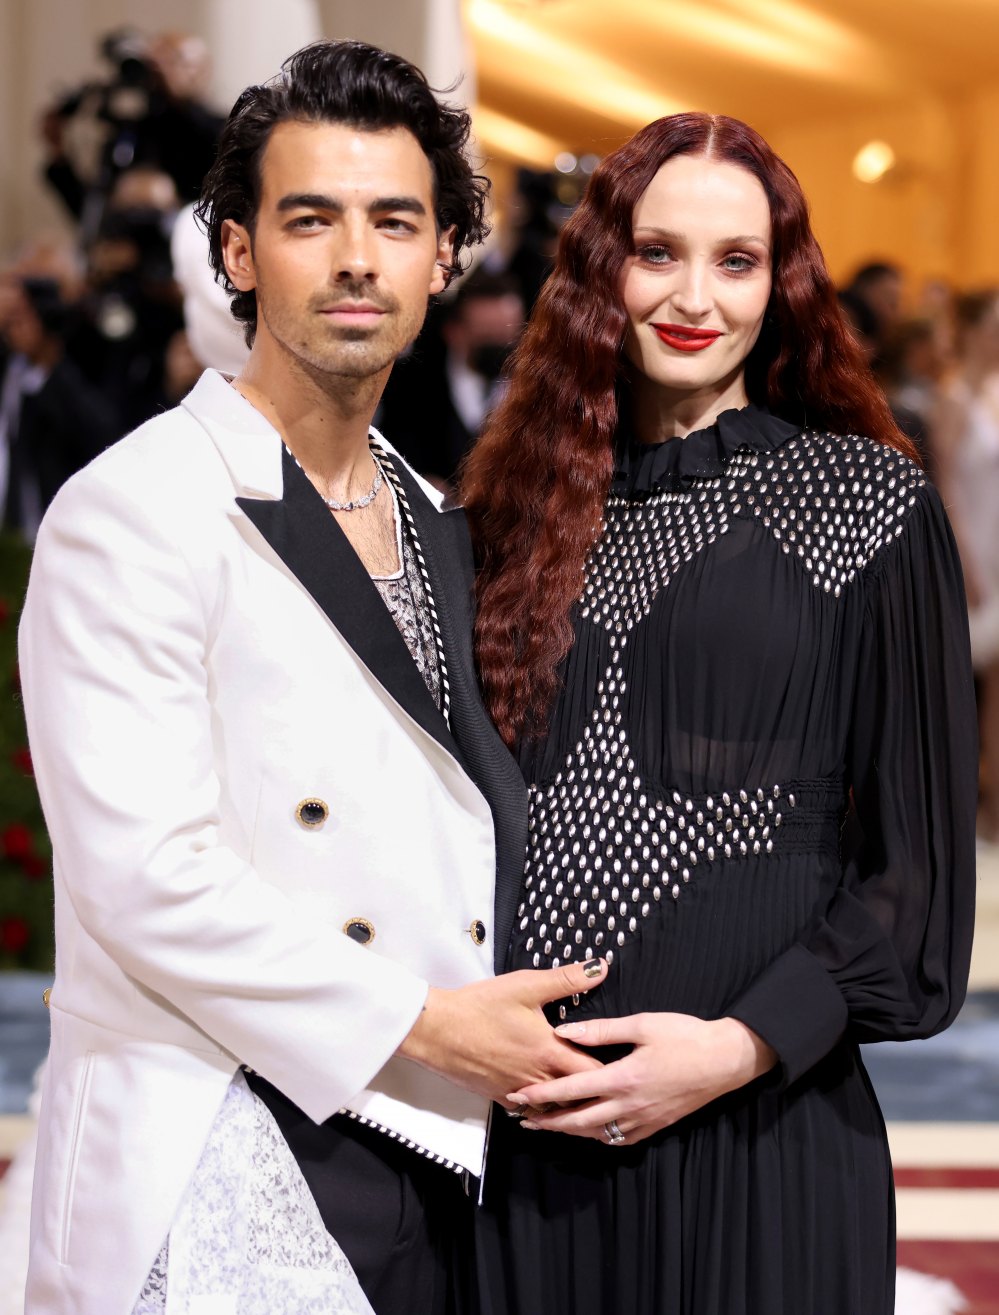 Joe Jonas Is ‘Enjoying’ Spending Time With Stormi Bree: ‘He’s Putting Himself Out There’